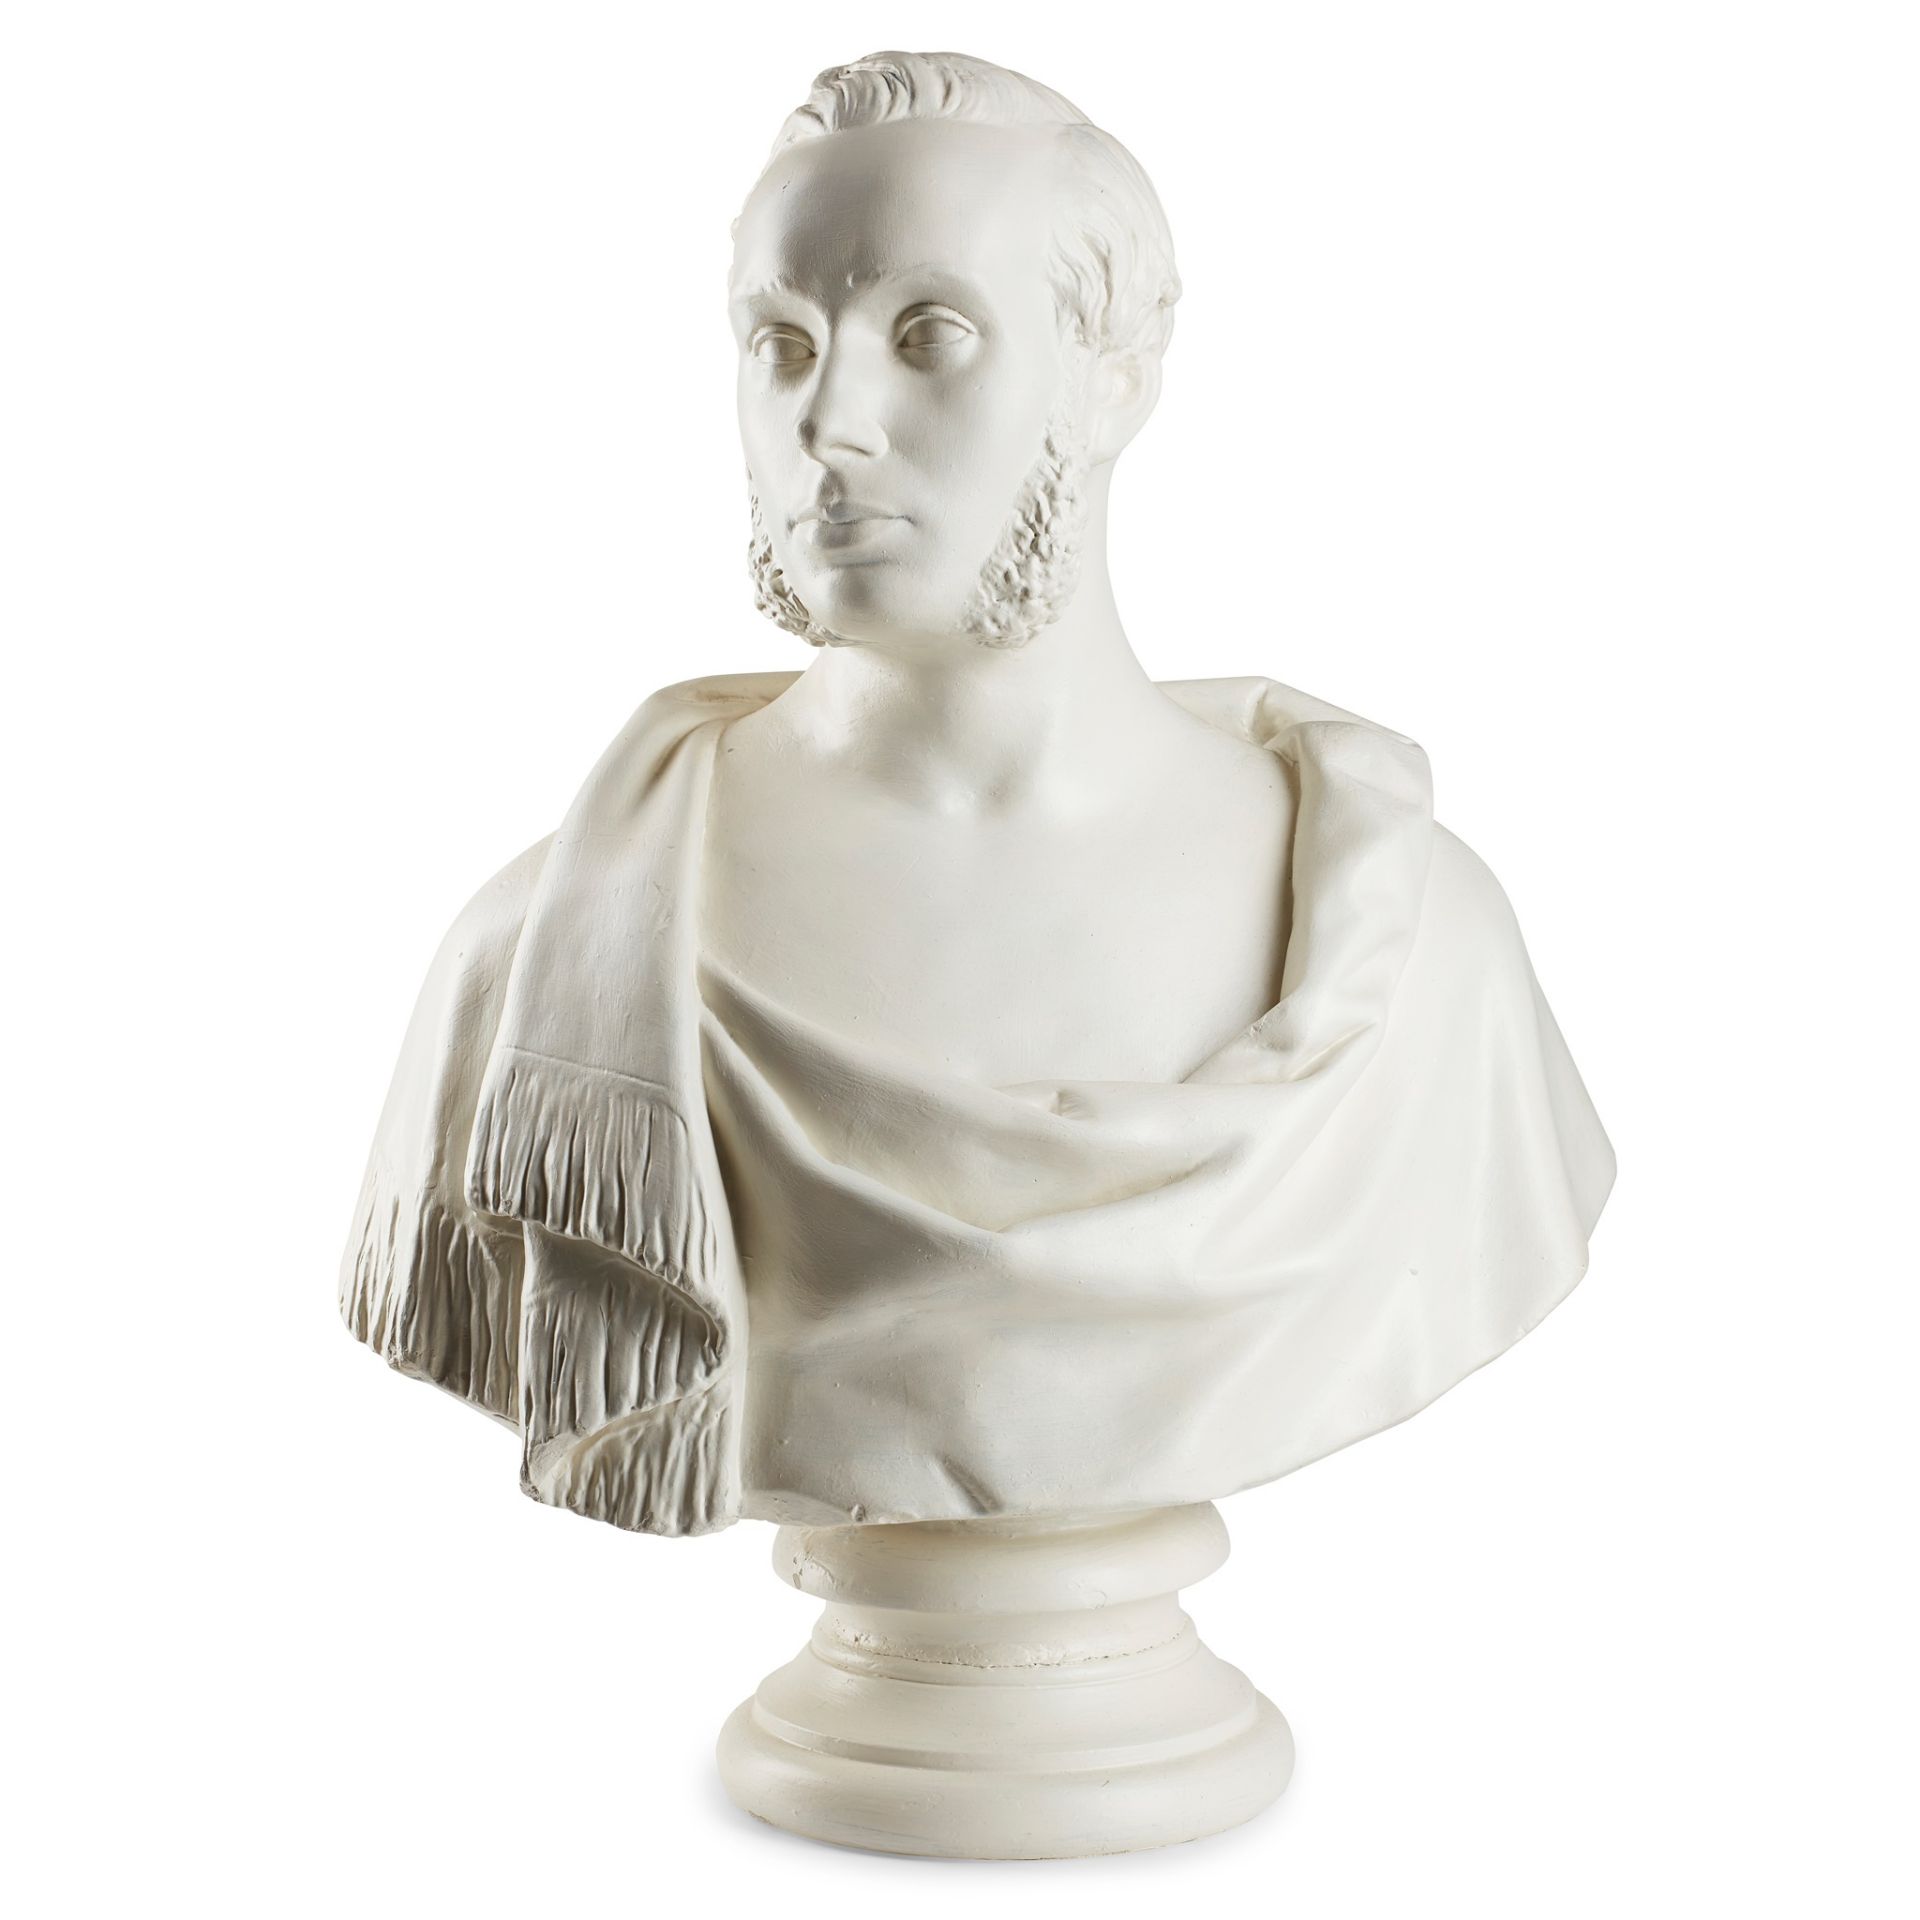 PAINTED PLASTER BUST OF A GENTLEMAN 19TH CENTURY